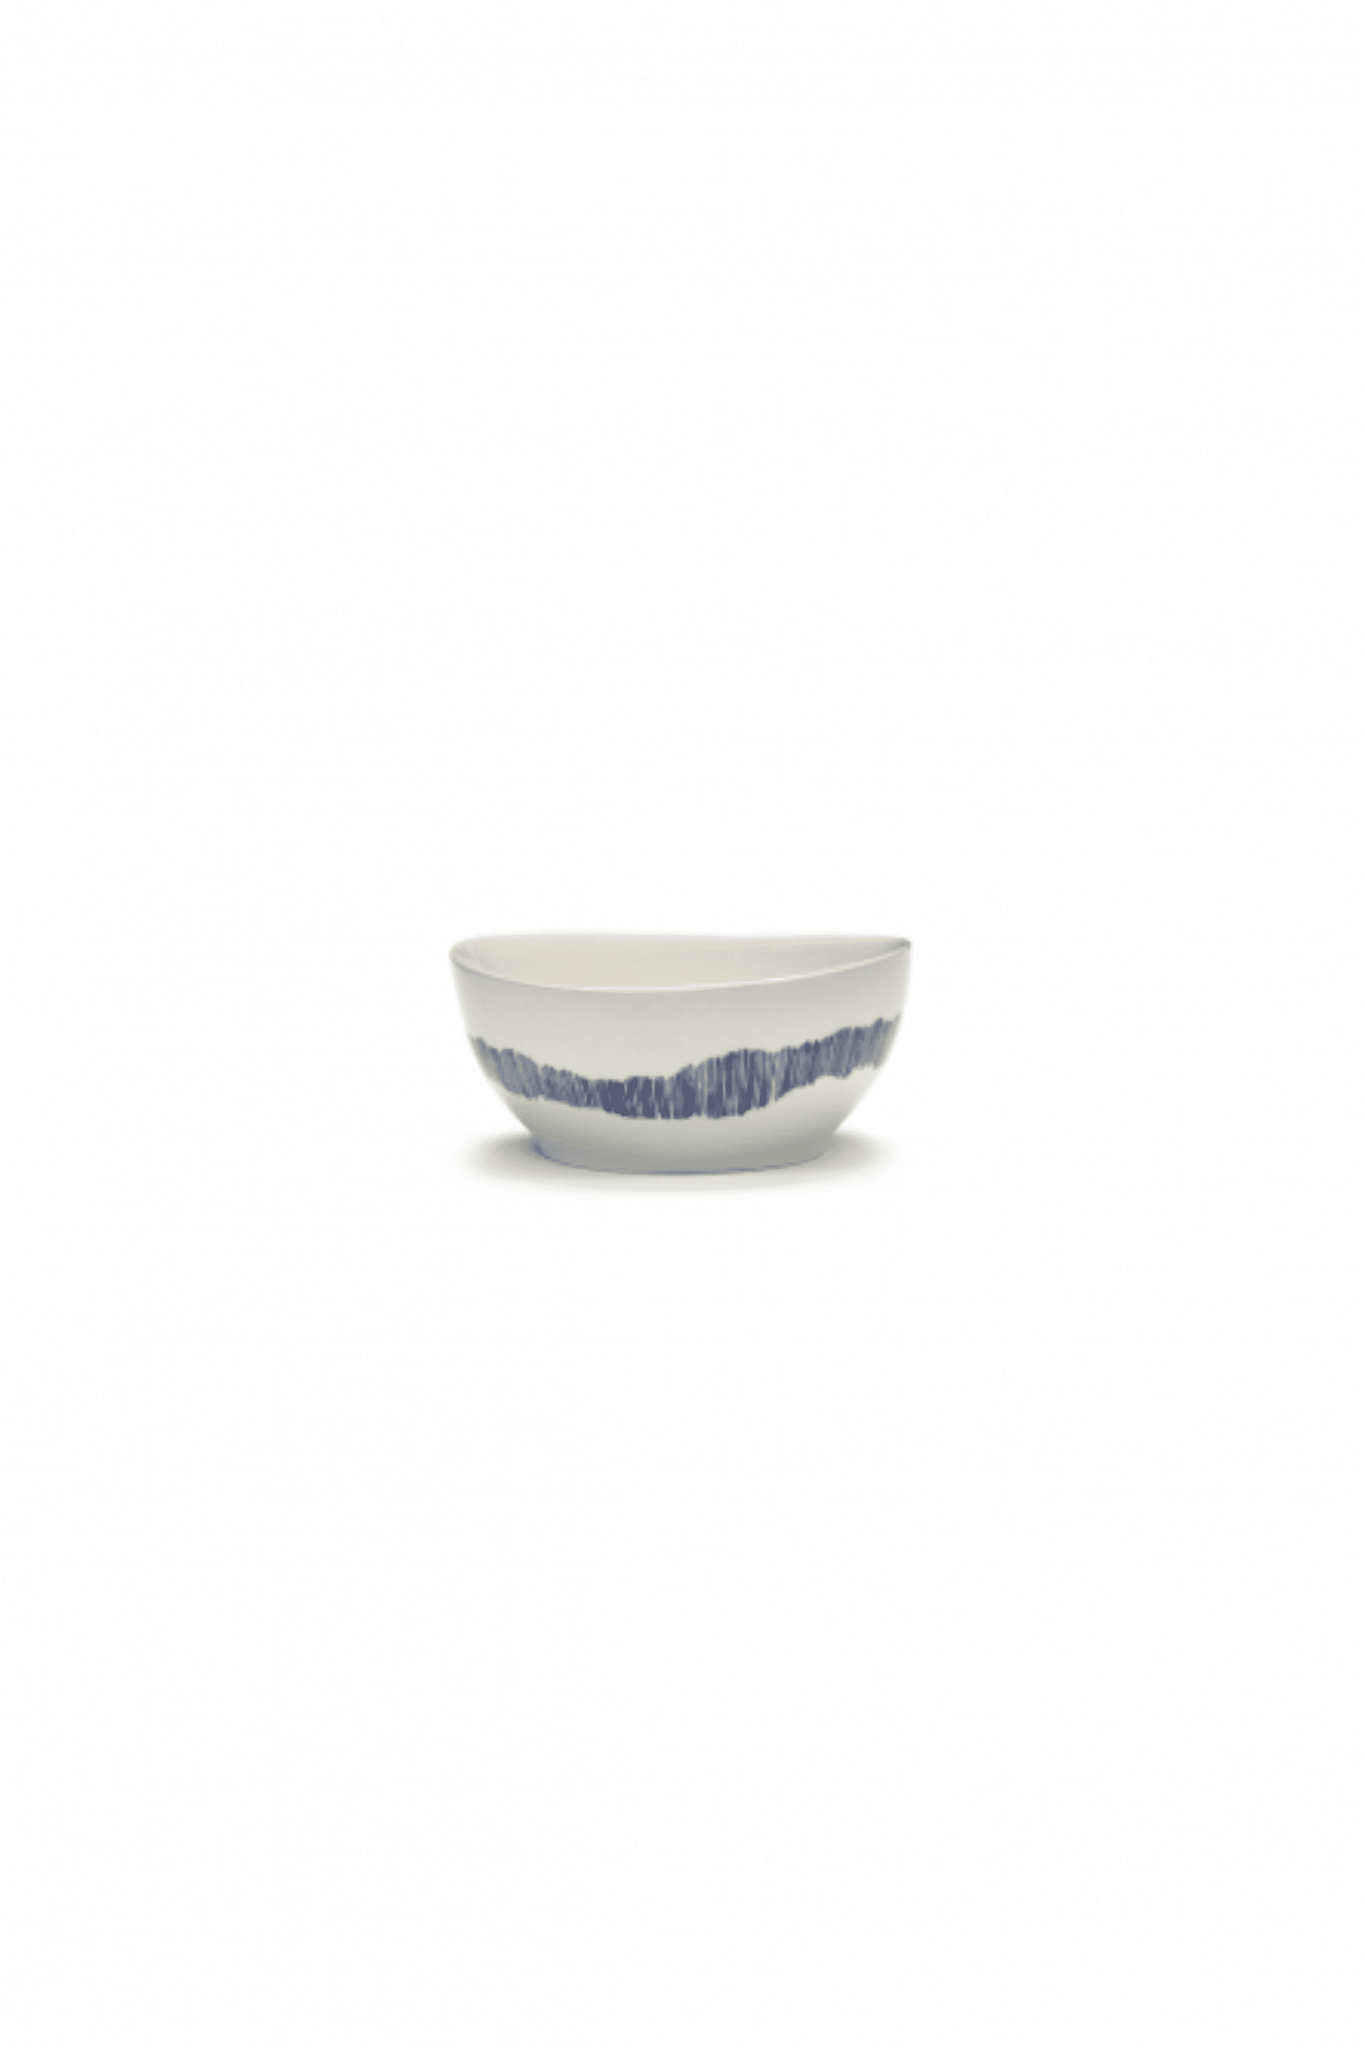 Small Bowl, White Swirl with Blue Stripes Ottolenghi Serax, side view